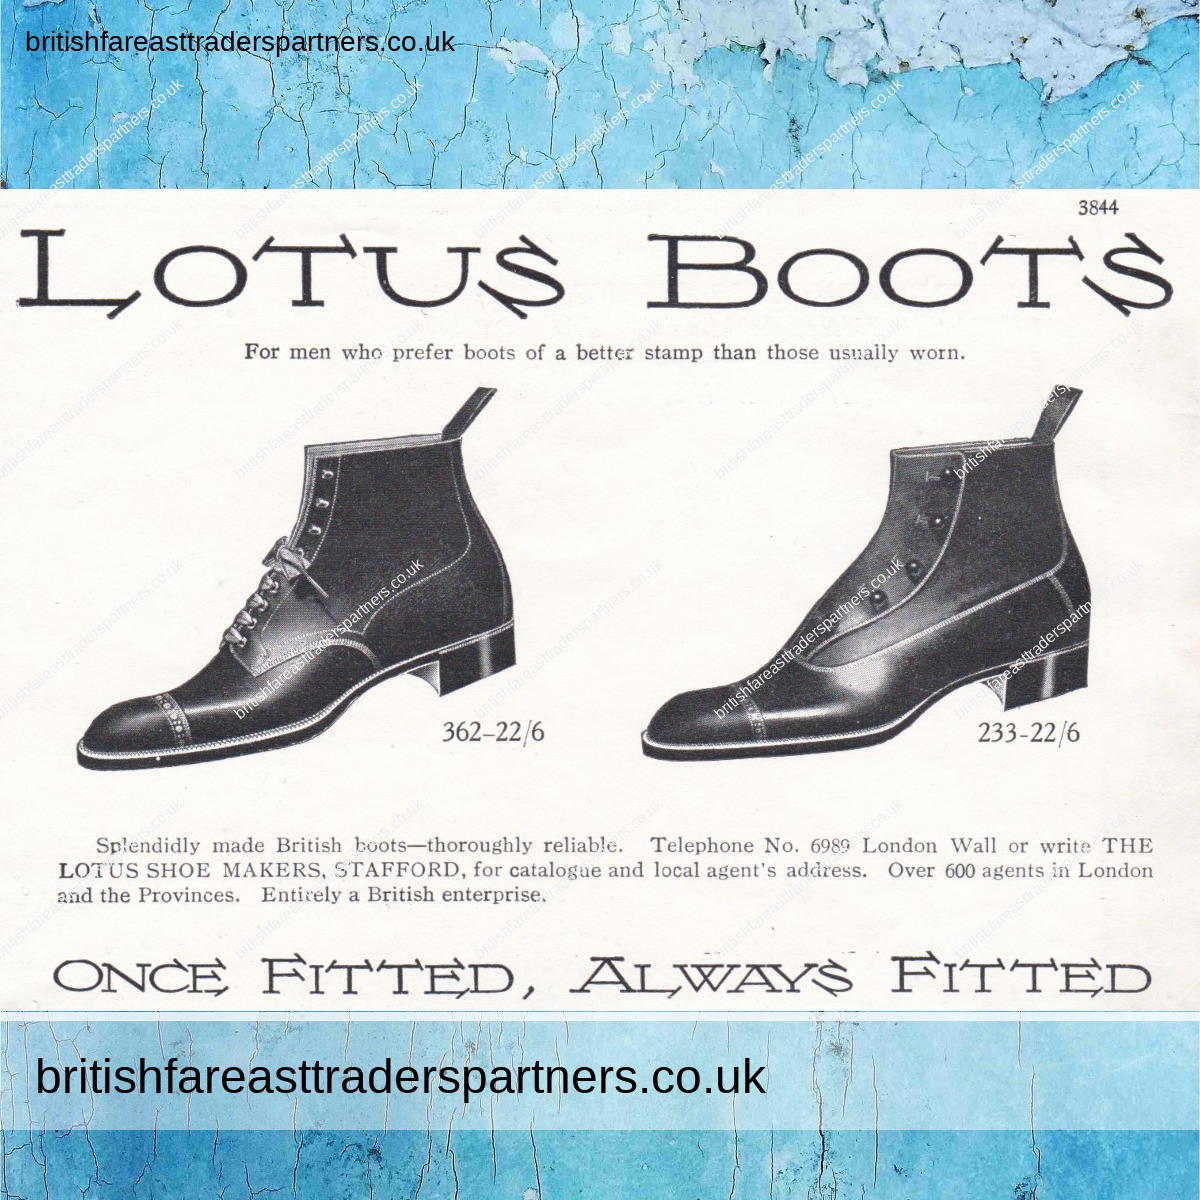 ANTIQUE PRINT ADVERTISING “LOTUS BOOTS BRITISH BOOTS FOR MEN” VINTAGE & ANTIQUES | COLLECTABLES | FASHION | ADVERTISING COLLECTABLES |  PAPER & EPHEMERA | BRITISH FASHION HERITAGE | LIFESTYLE & CULTURE